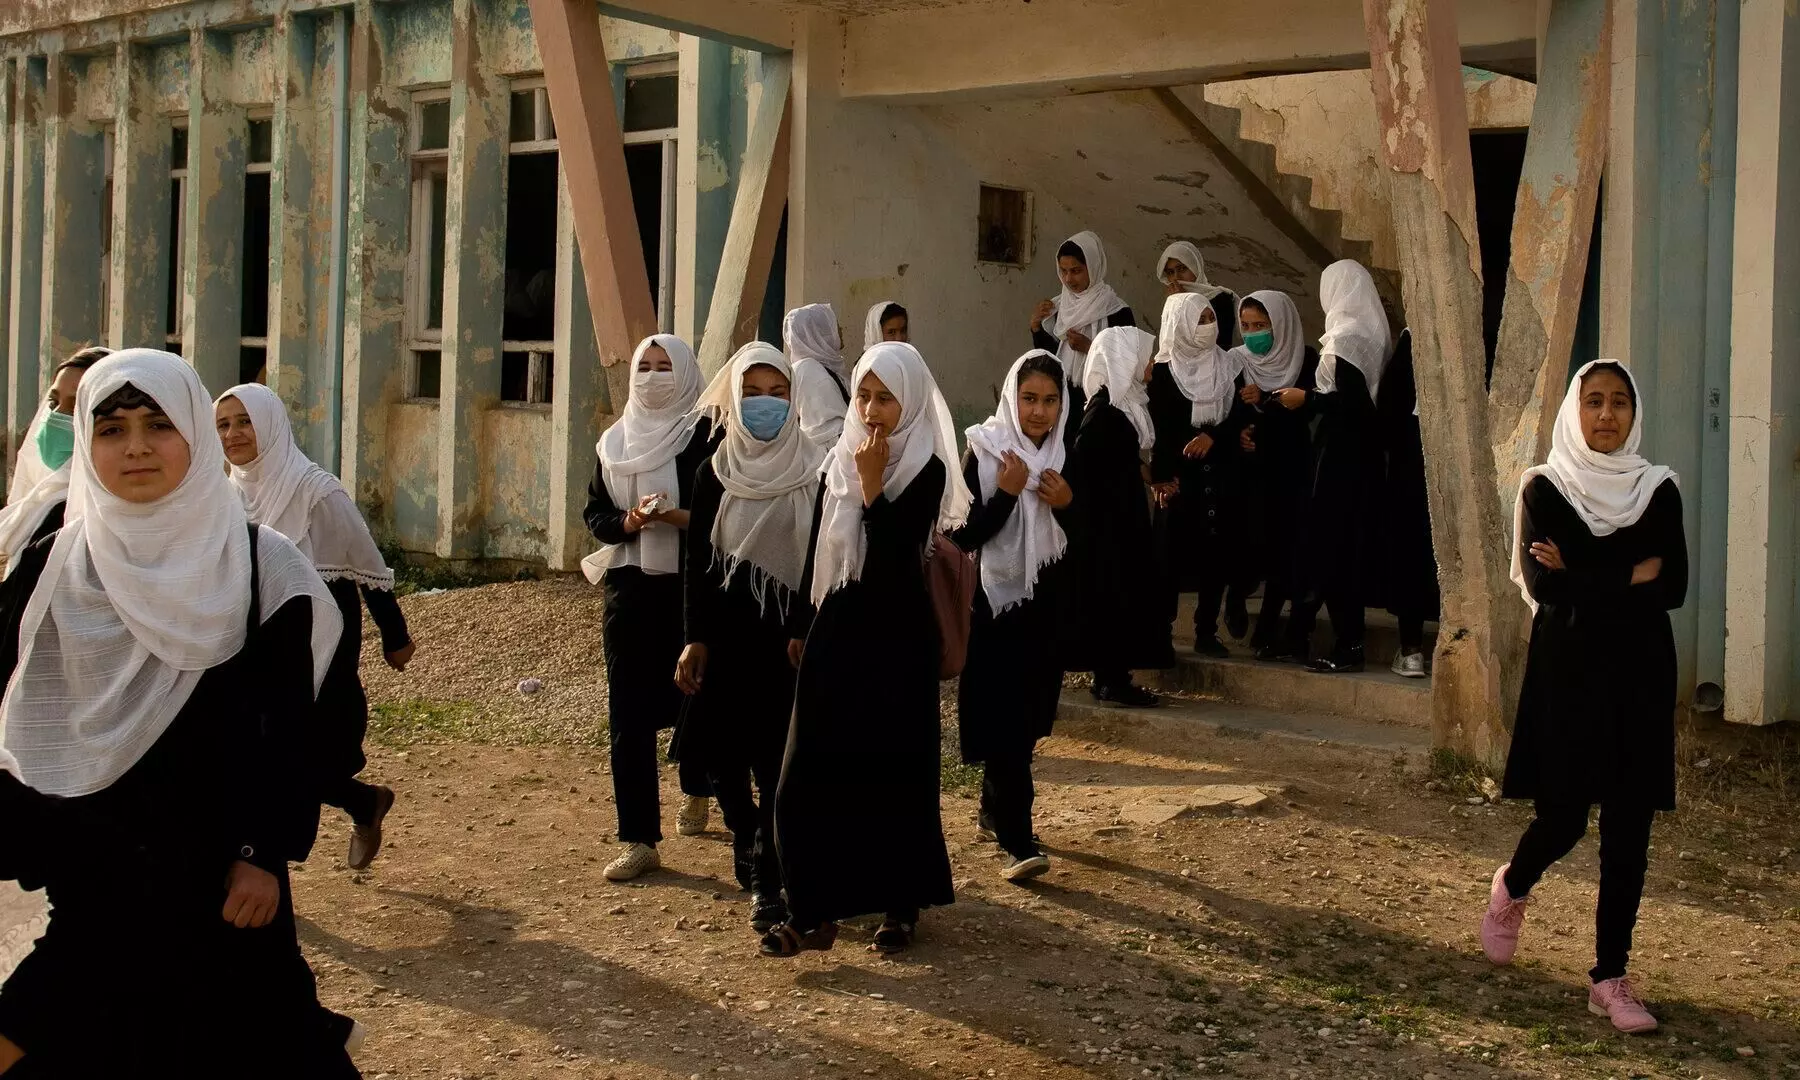 Allow girls back to school: says India and UK to Taliban